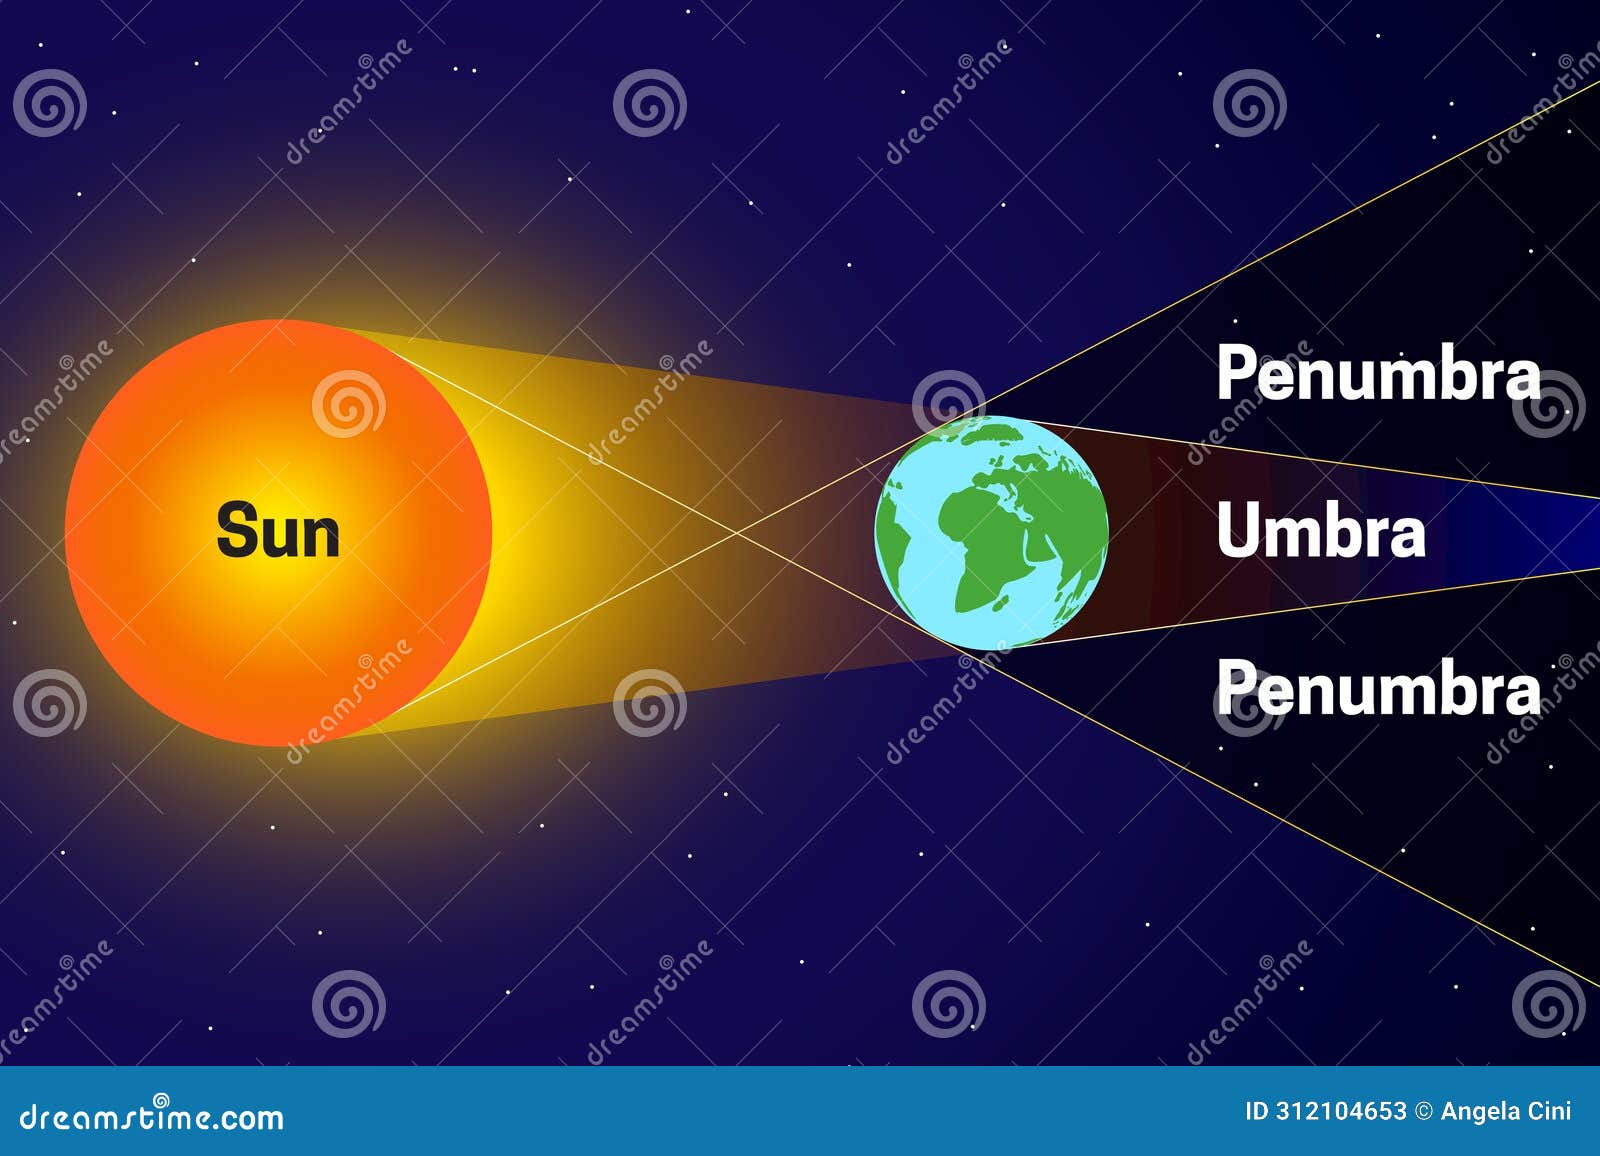 penumbra and umbra with sun, moon, earth space chart 